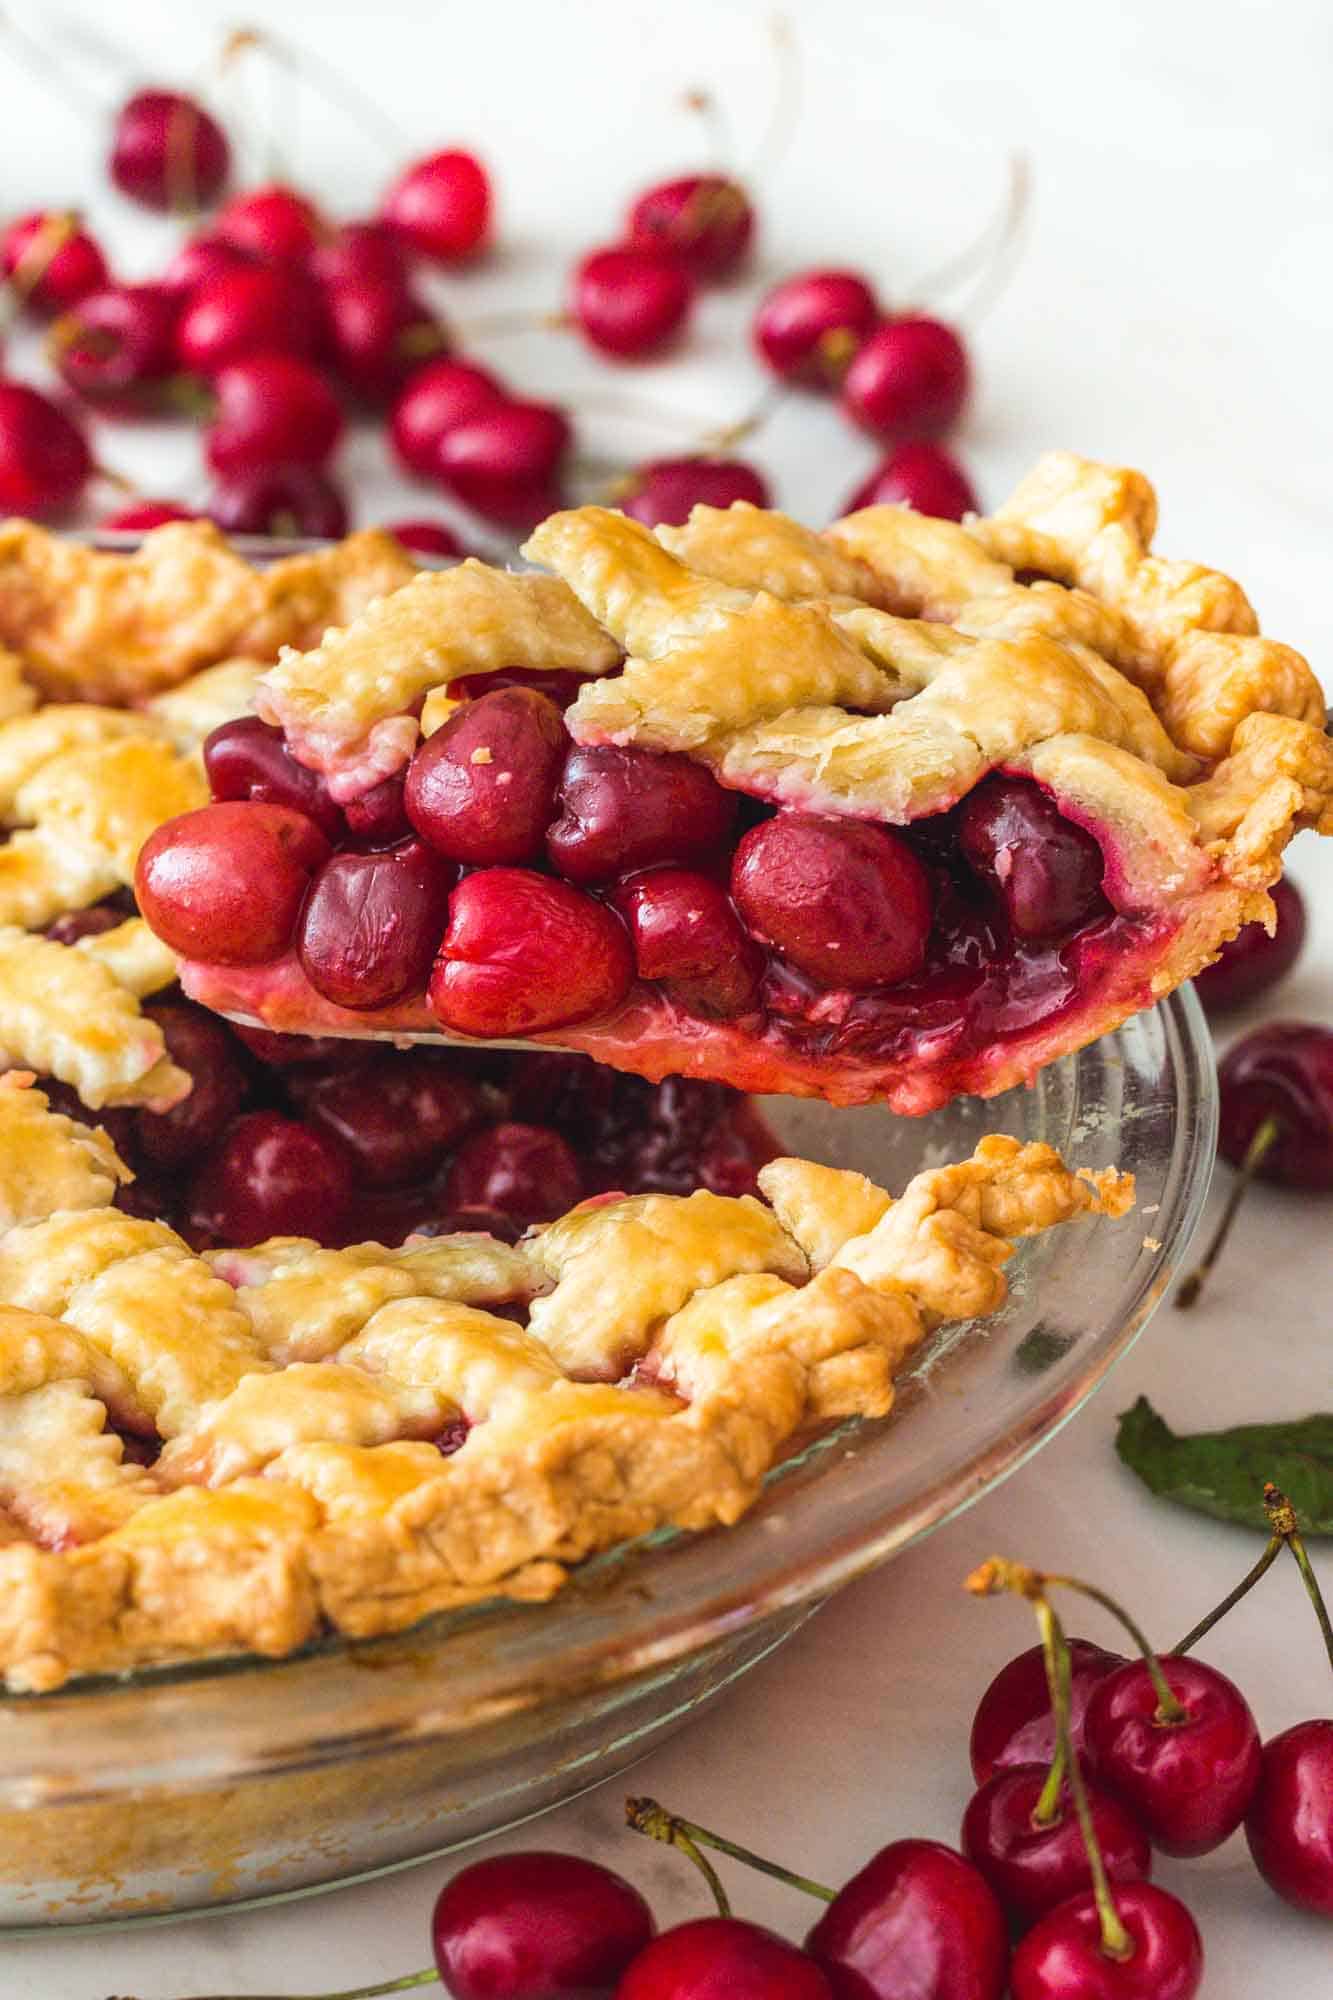 Taking a slice of the cherry pie, with fresh cherries on the sides